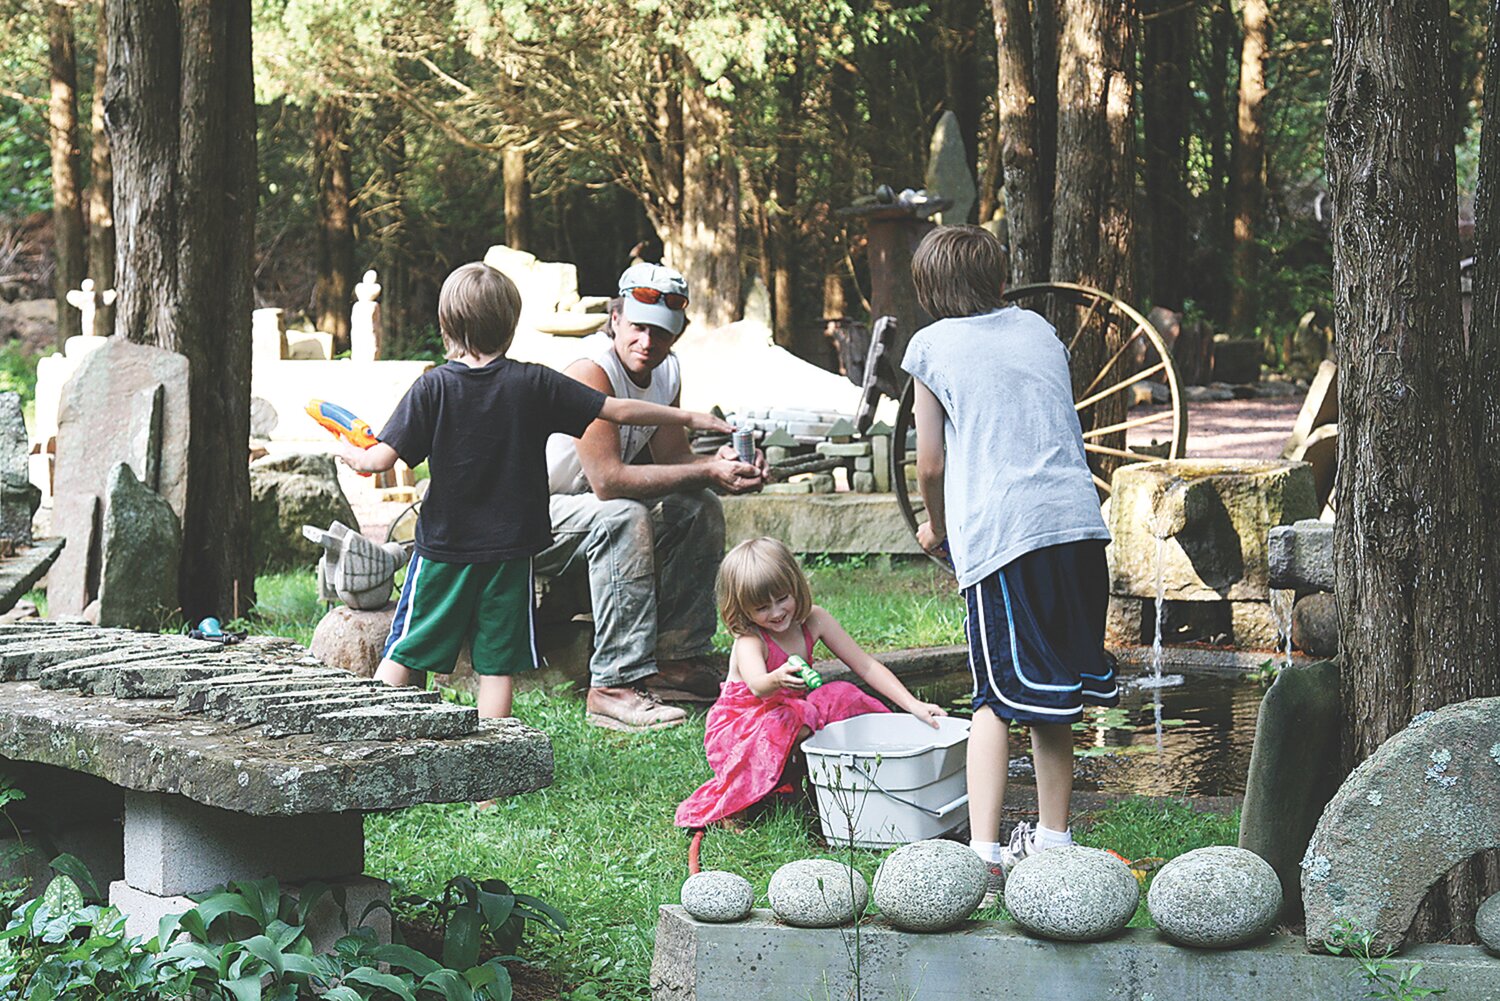 Steven Snyder with Justin’s children, Nathan, Hayden and Cadence Anchinsko, at Cedar Maze playing at the pond.